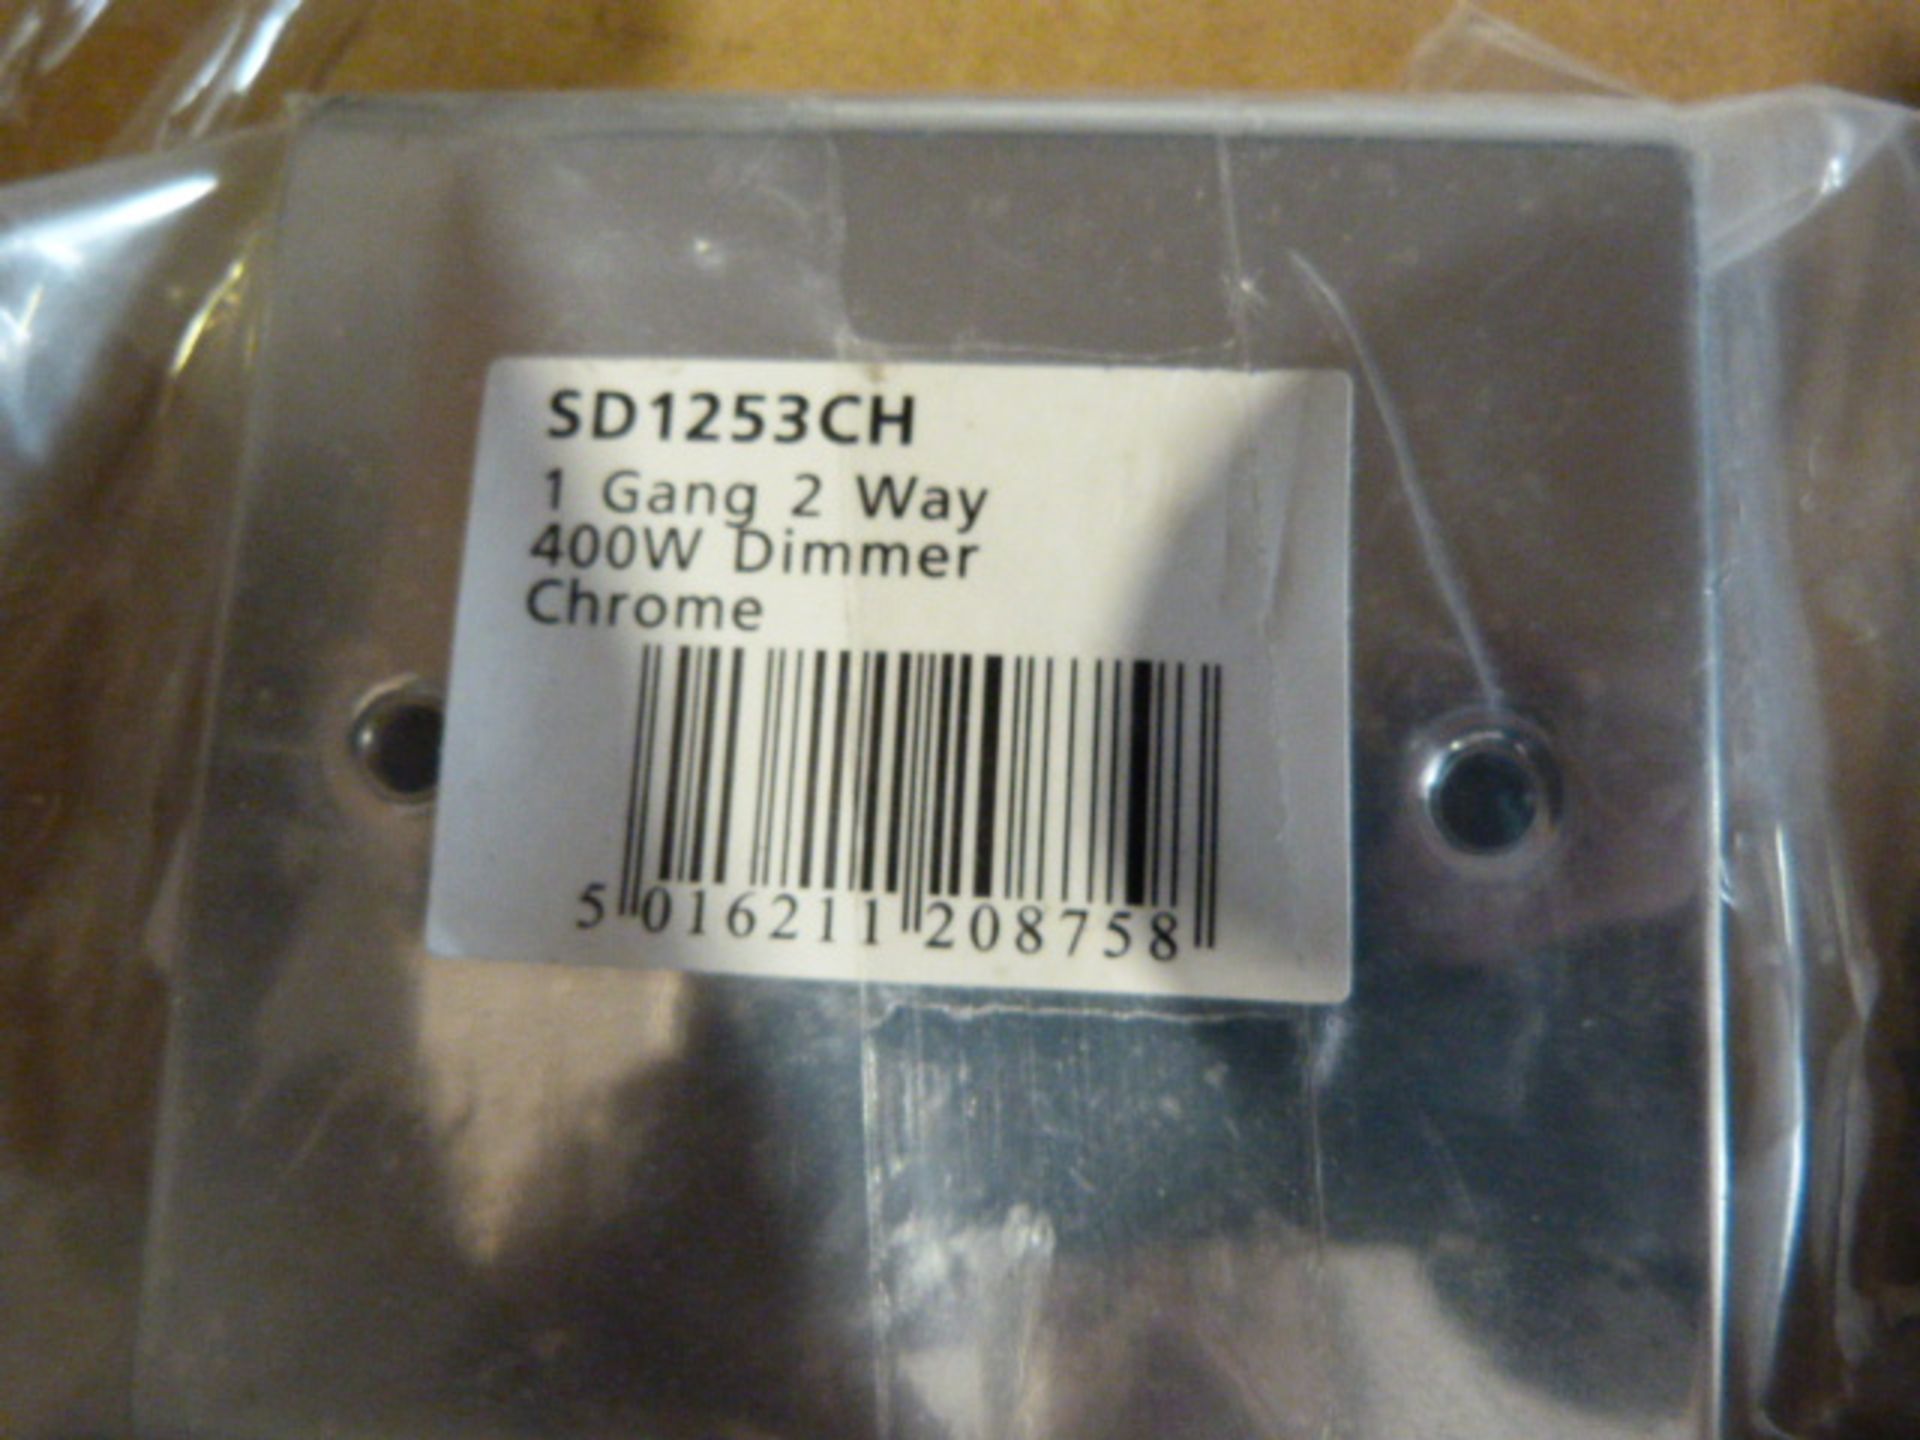 Box of 1-Gang 2-Way 400w Dimmers in Chrome SD1253C - Image 2 of 2